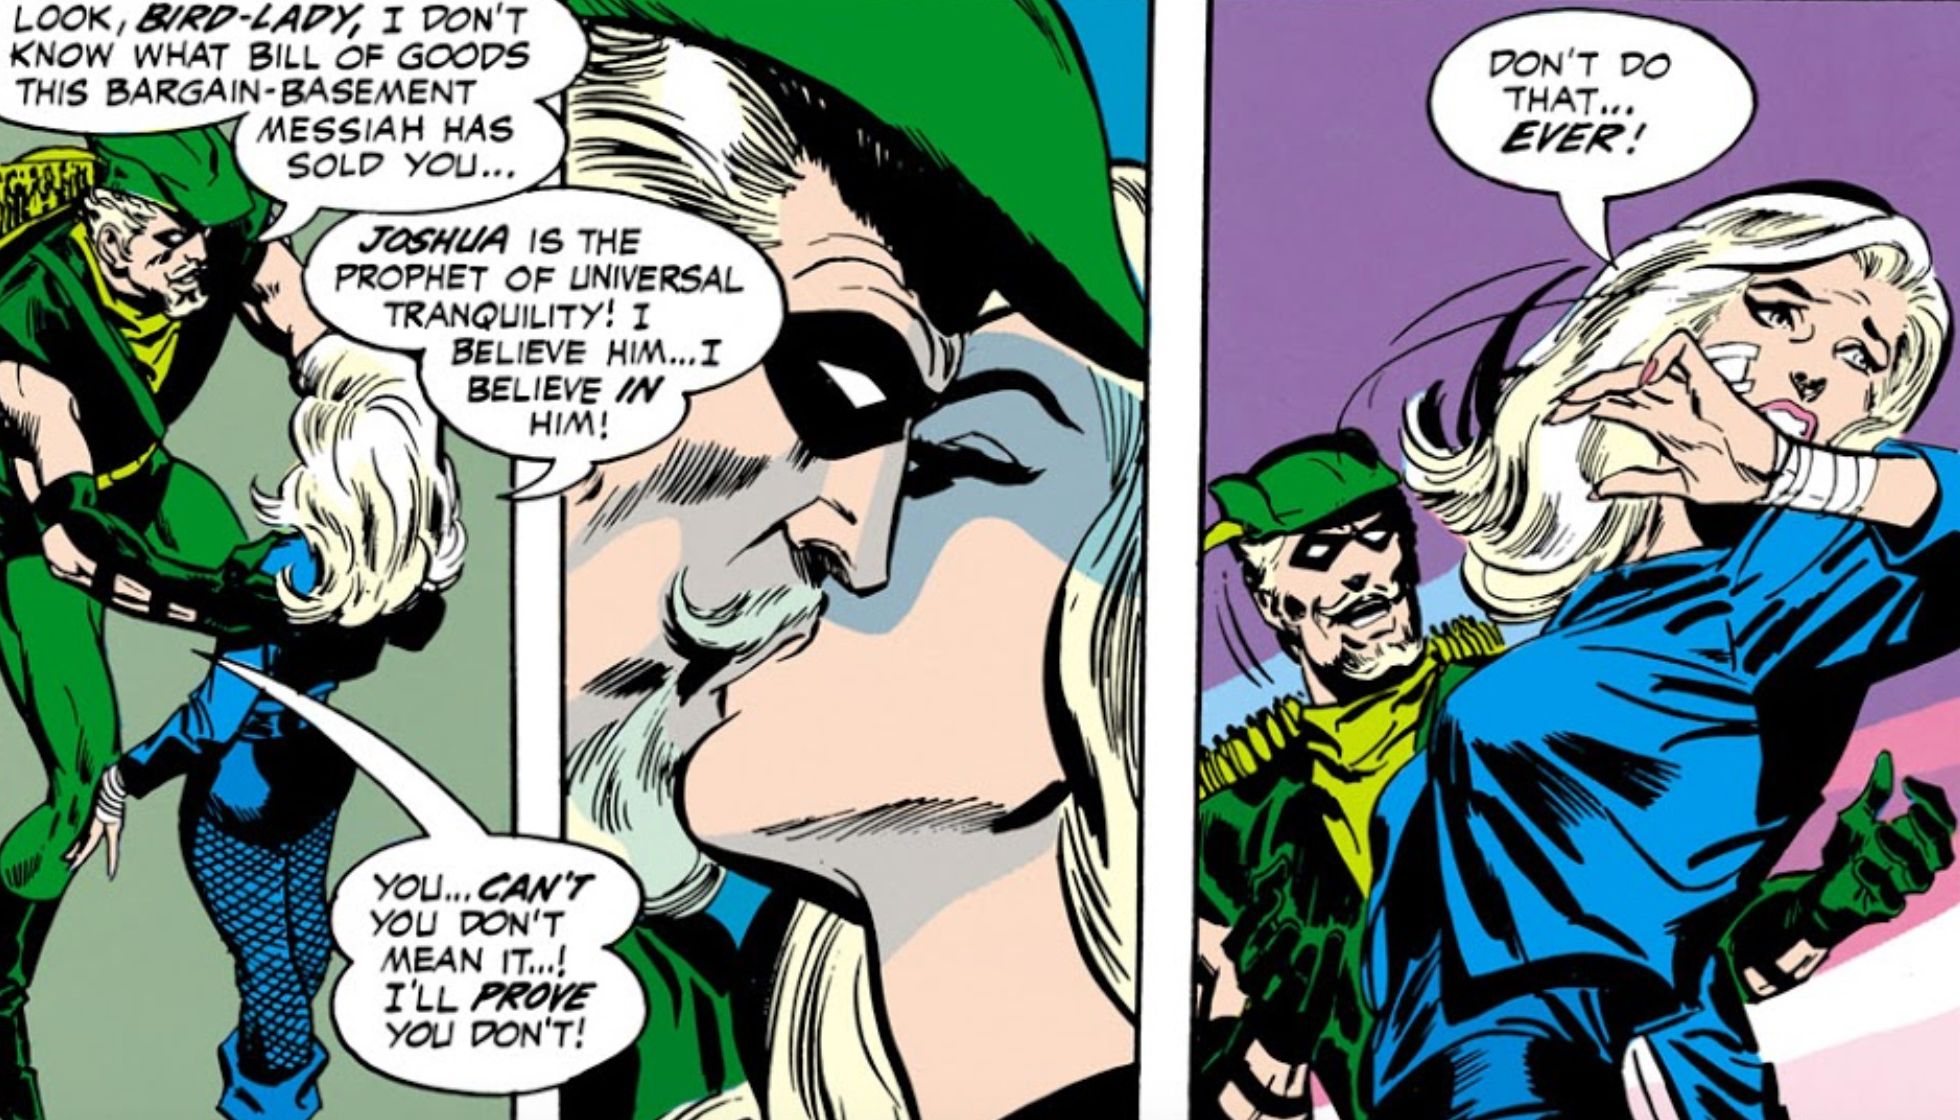 Dinah Under the Influence of Cult Leader Joshua in Green Lantern volume 2 issue 78